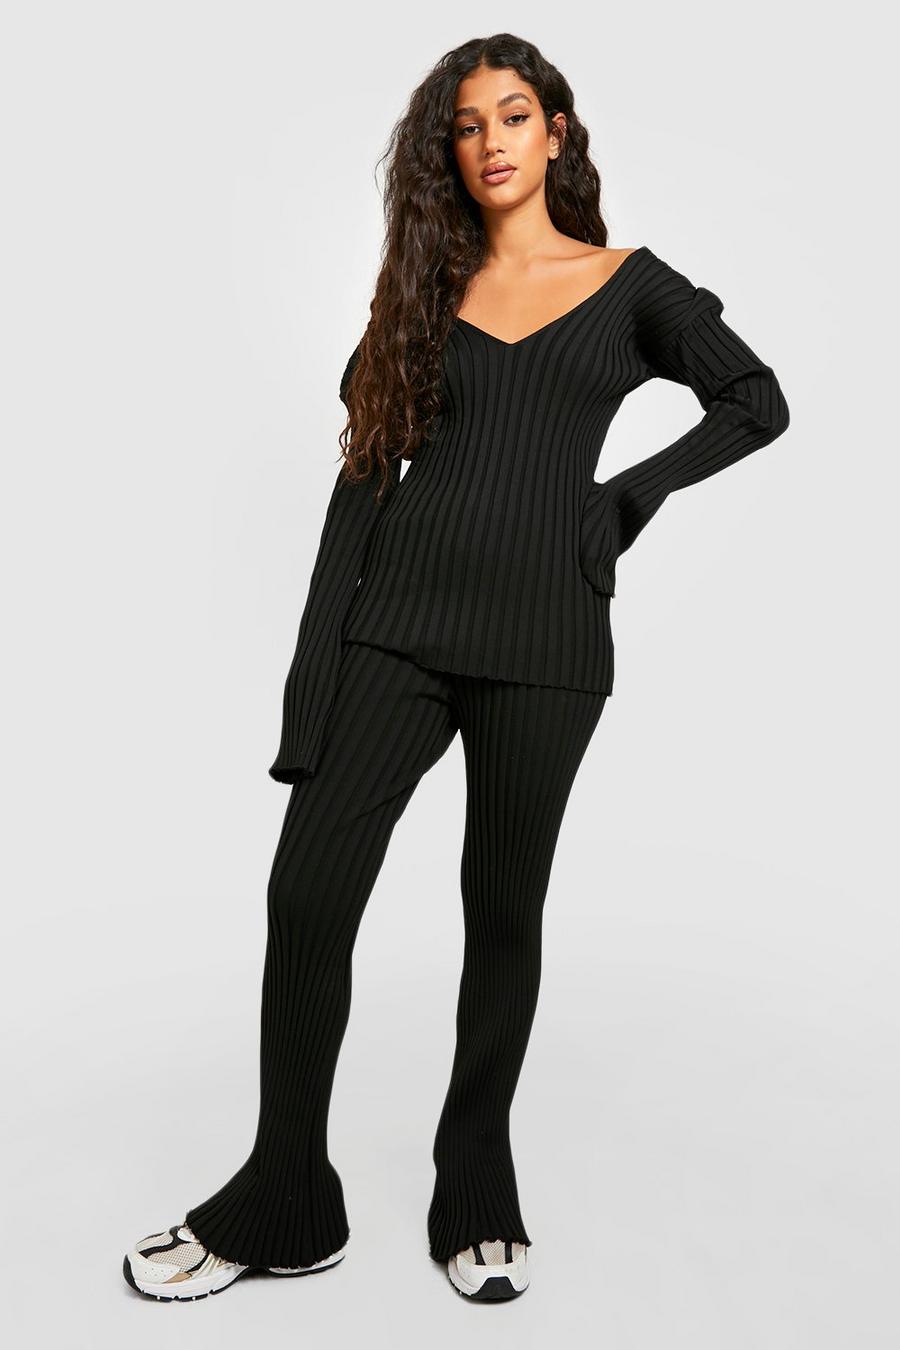 Black Two Tone Plunge Jumper Knitted Set